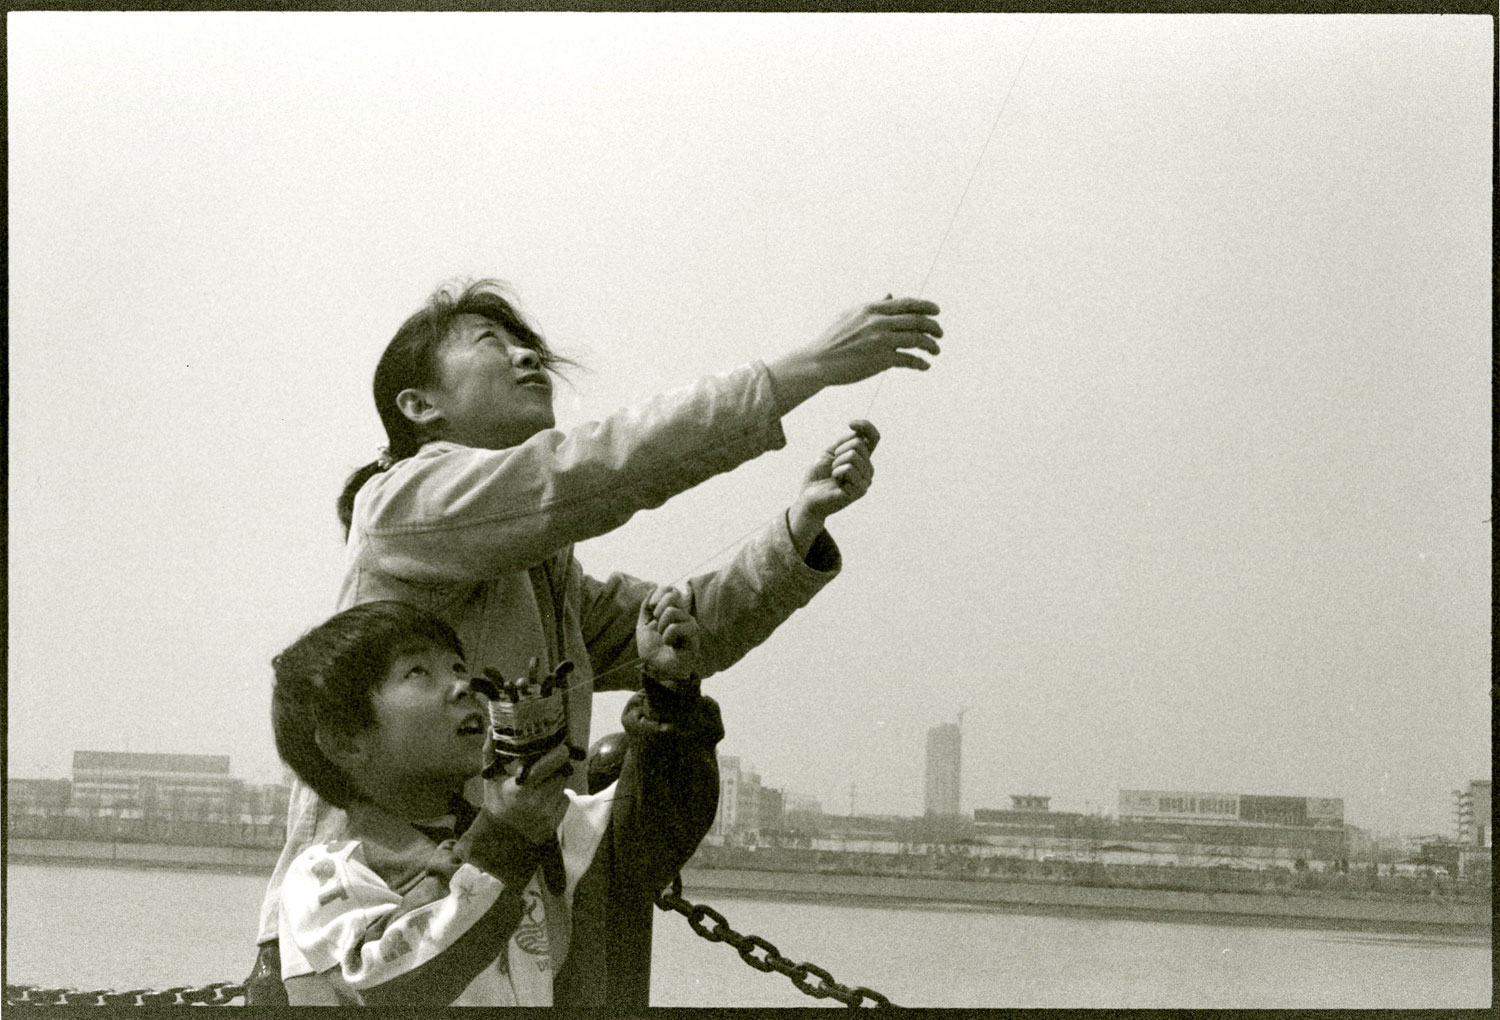 Kite - Fenhe park, Taiyuan with branch of Yellow River